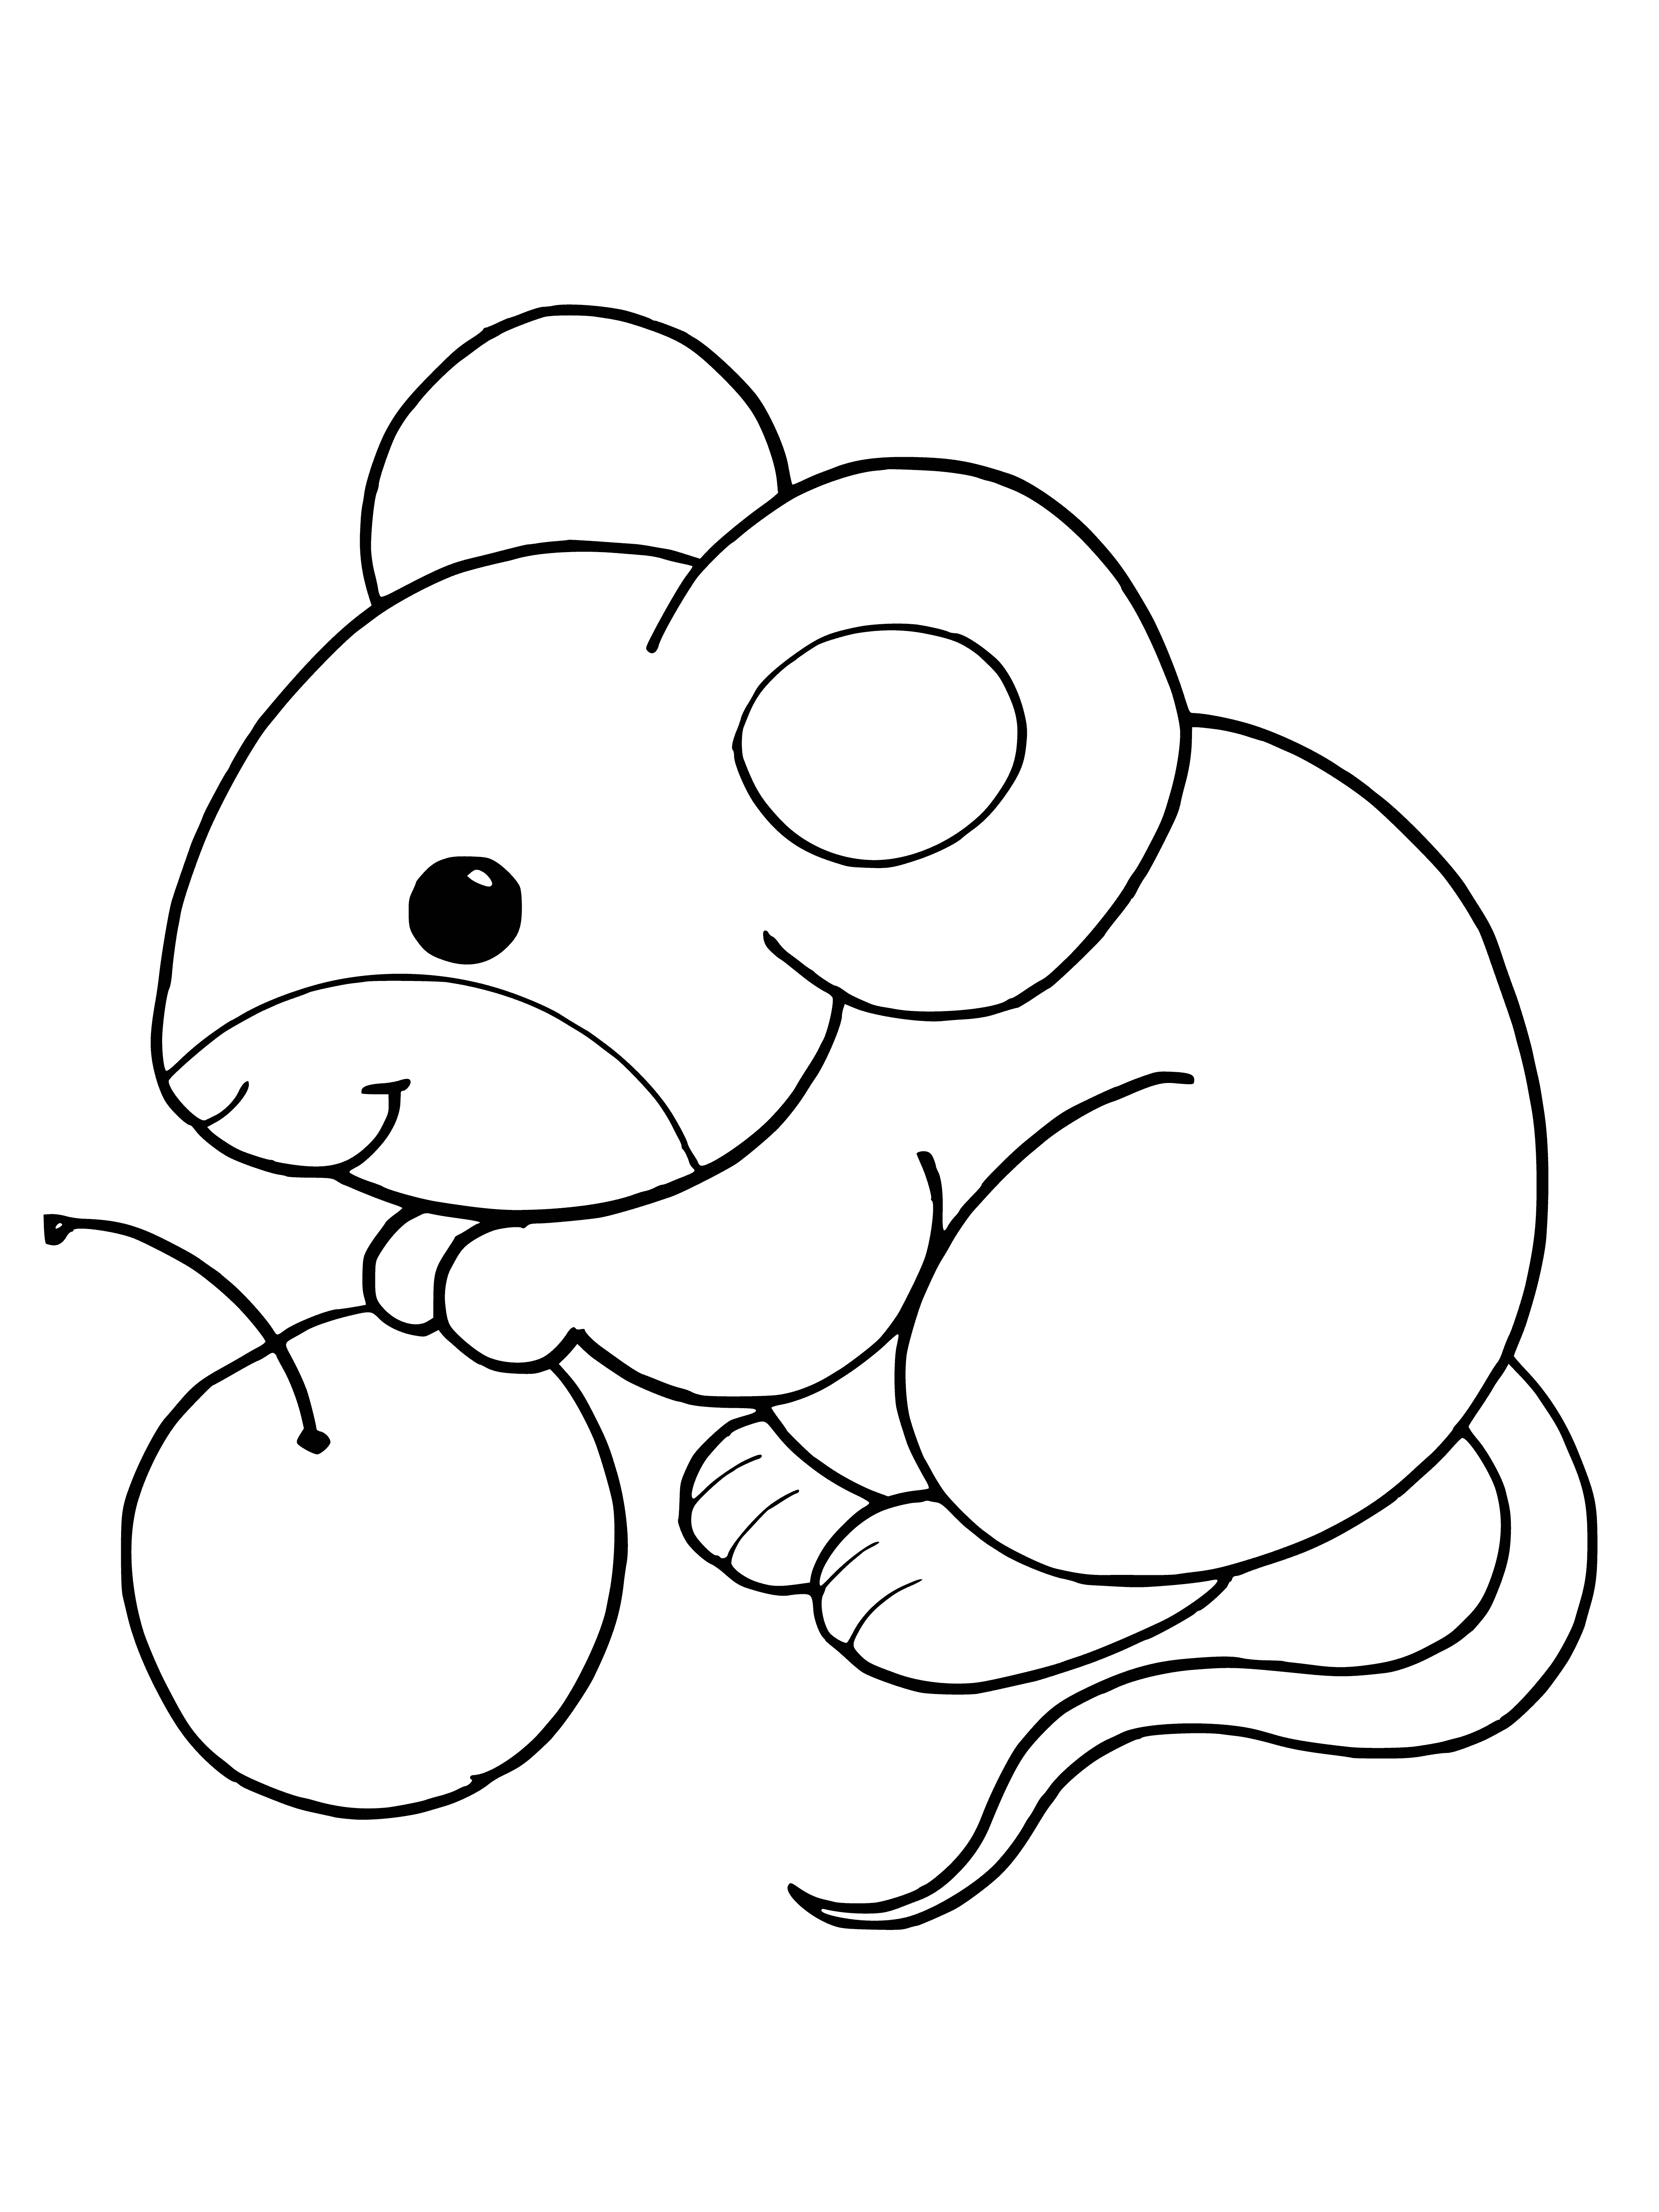 coloring page: Rat nibbling on apple: long tail, pointy ears, beady eyes.